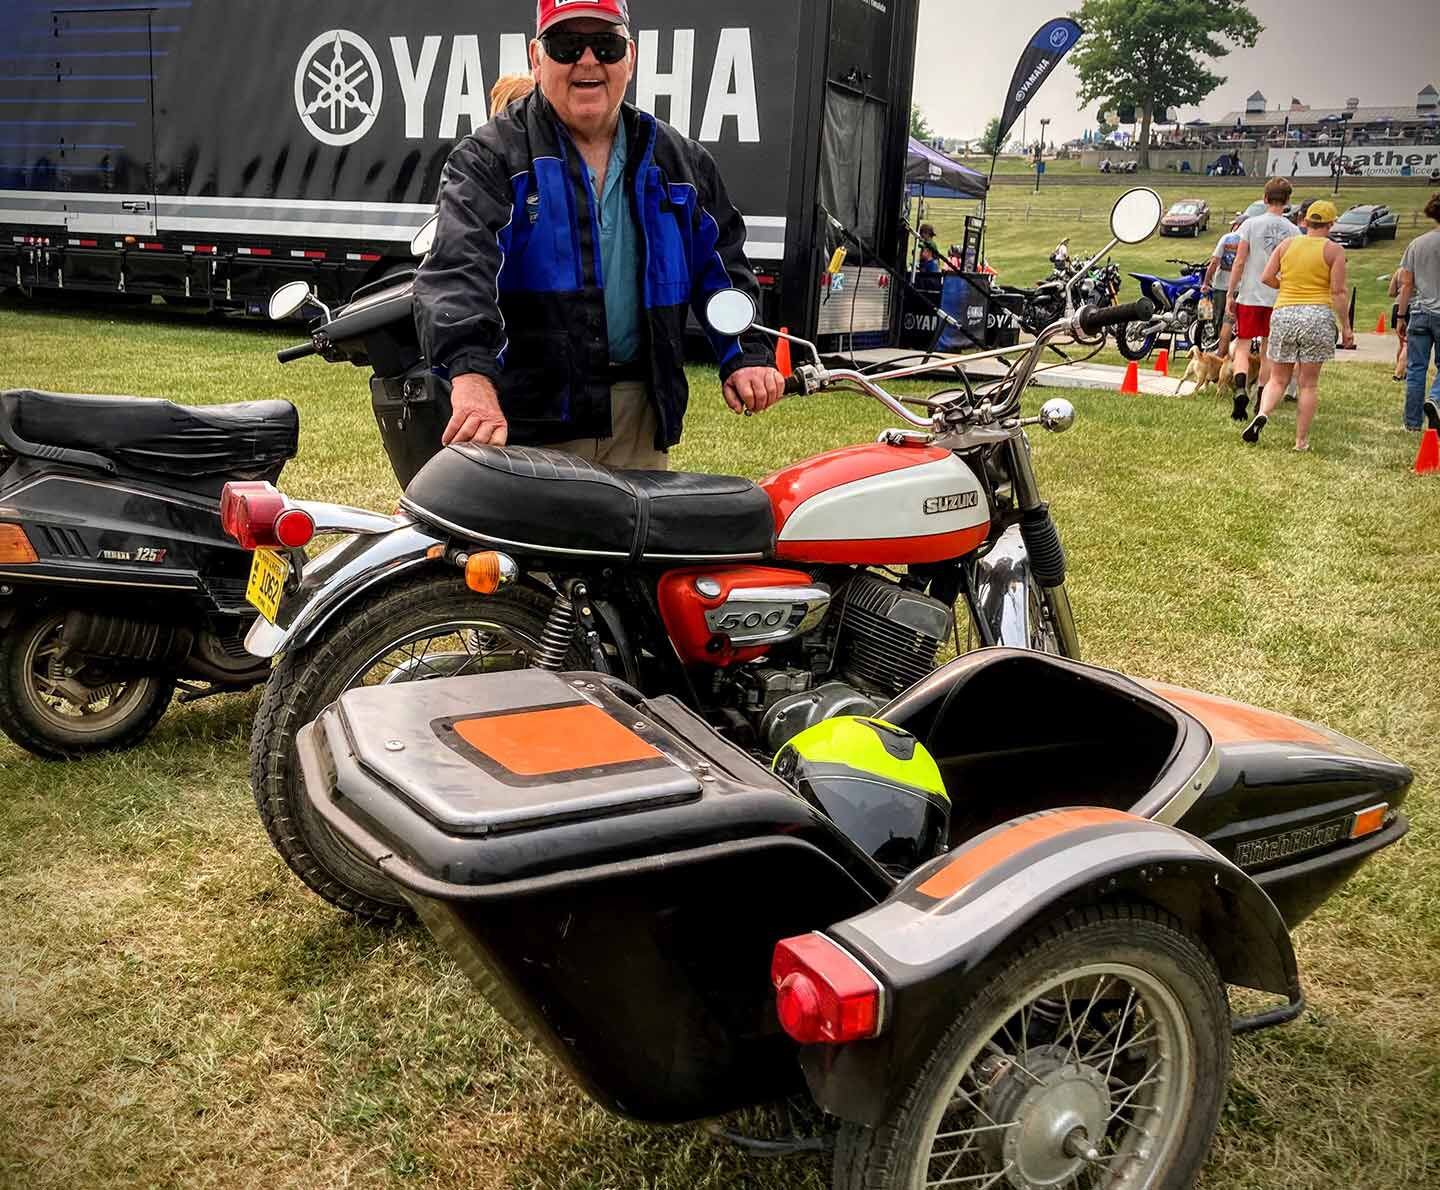 Where else but Road America? Suzuki T500 “Titan” with sidecar.